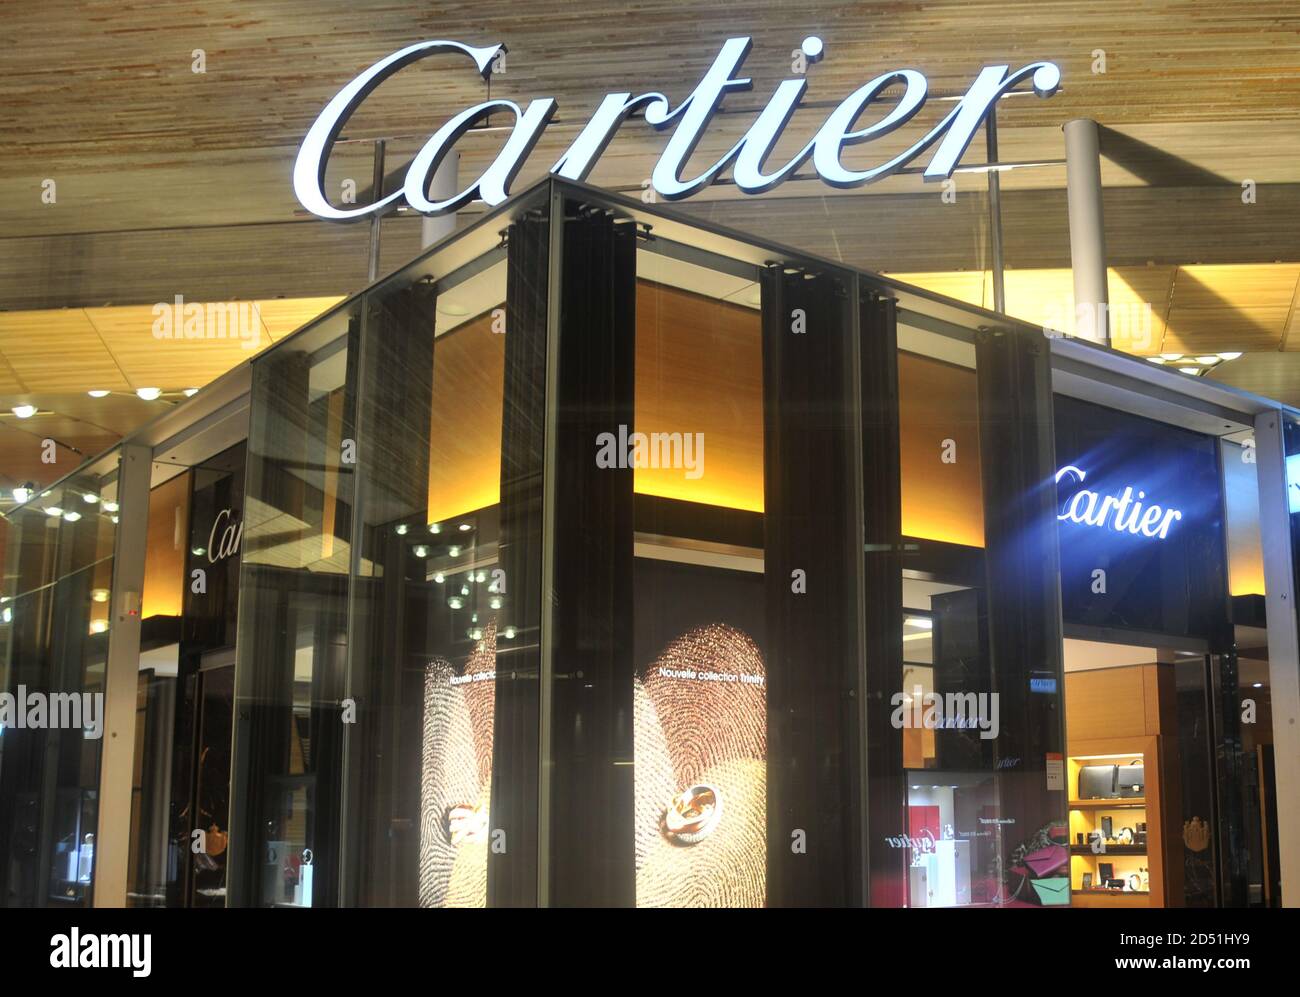 cartier store in lyon france